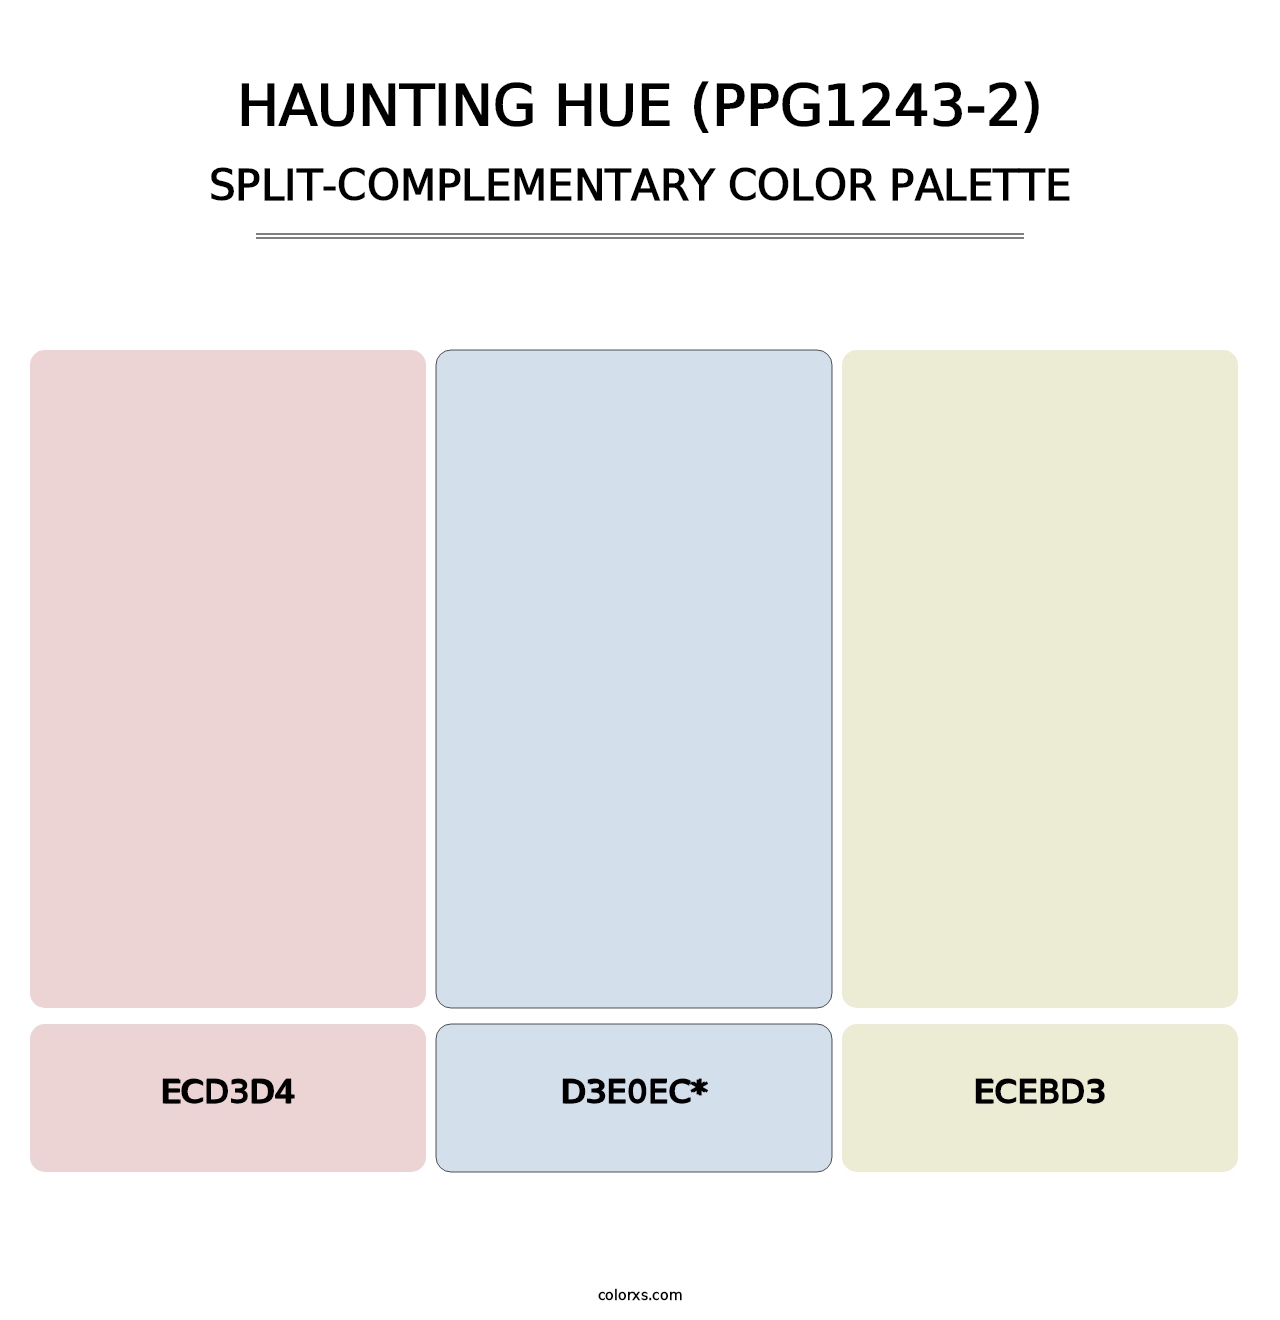 Haunting Hue (PPG1243-2) - Split-Complementary Color Palette